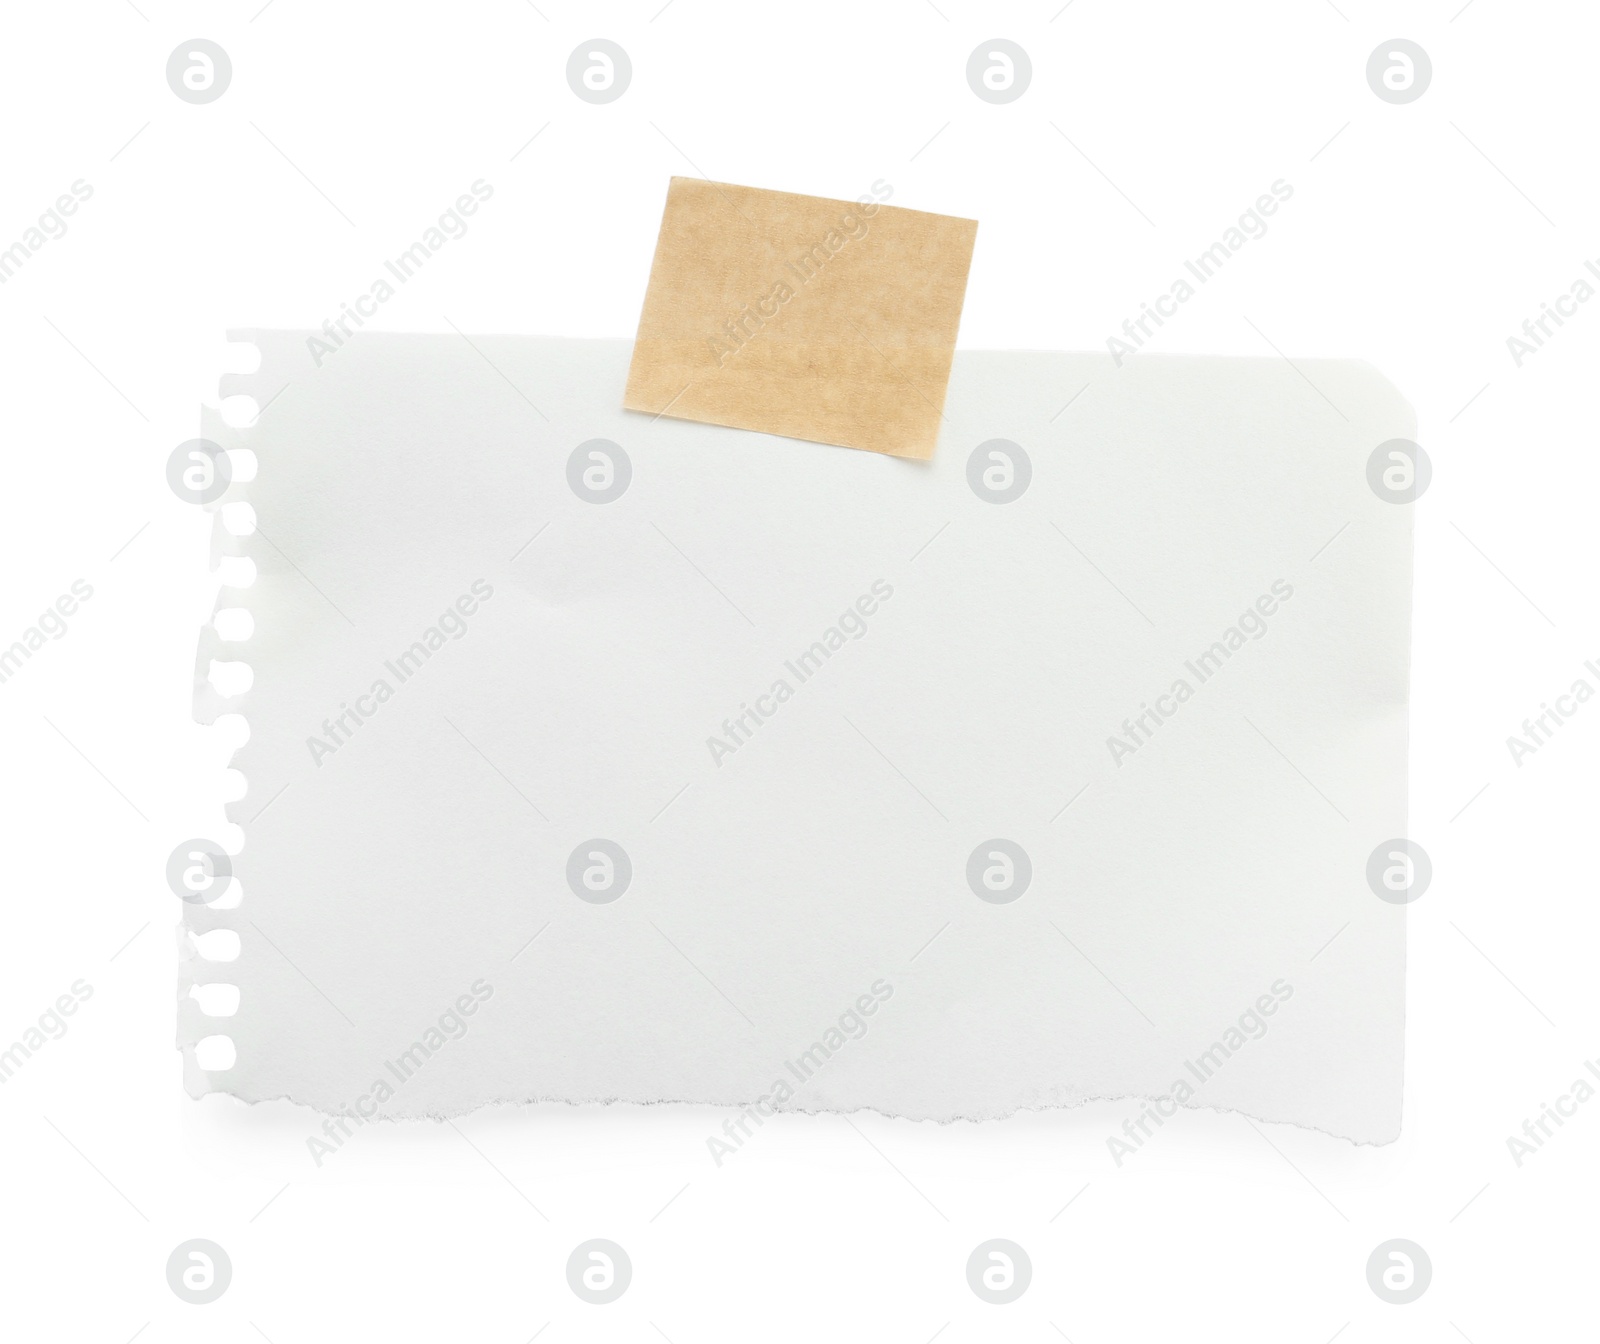 Photo of Piece of blank notebook sheet and adhesive tape isolated on white